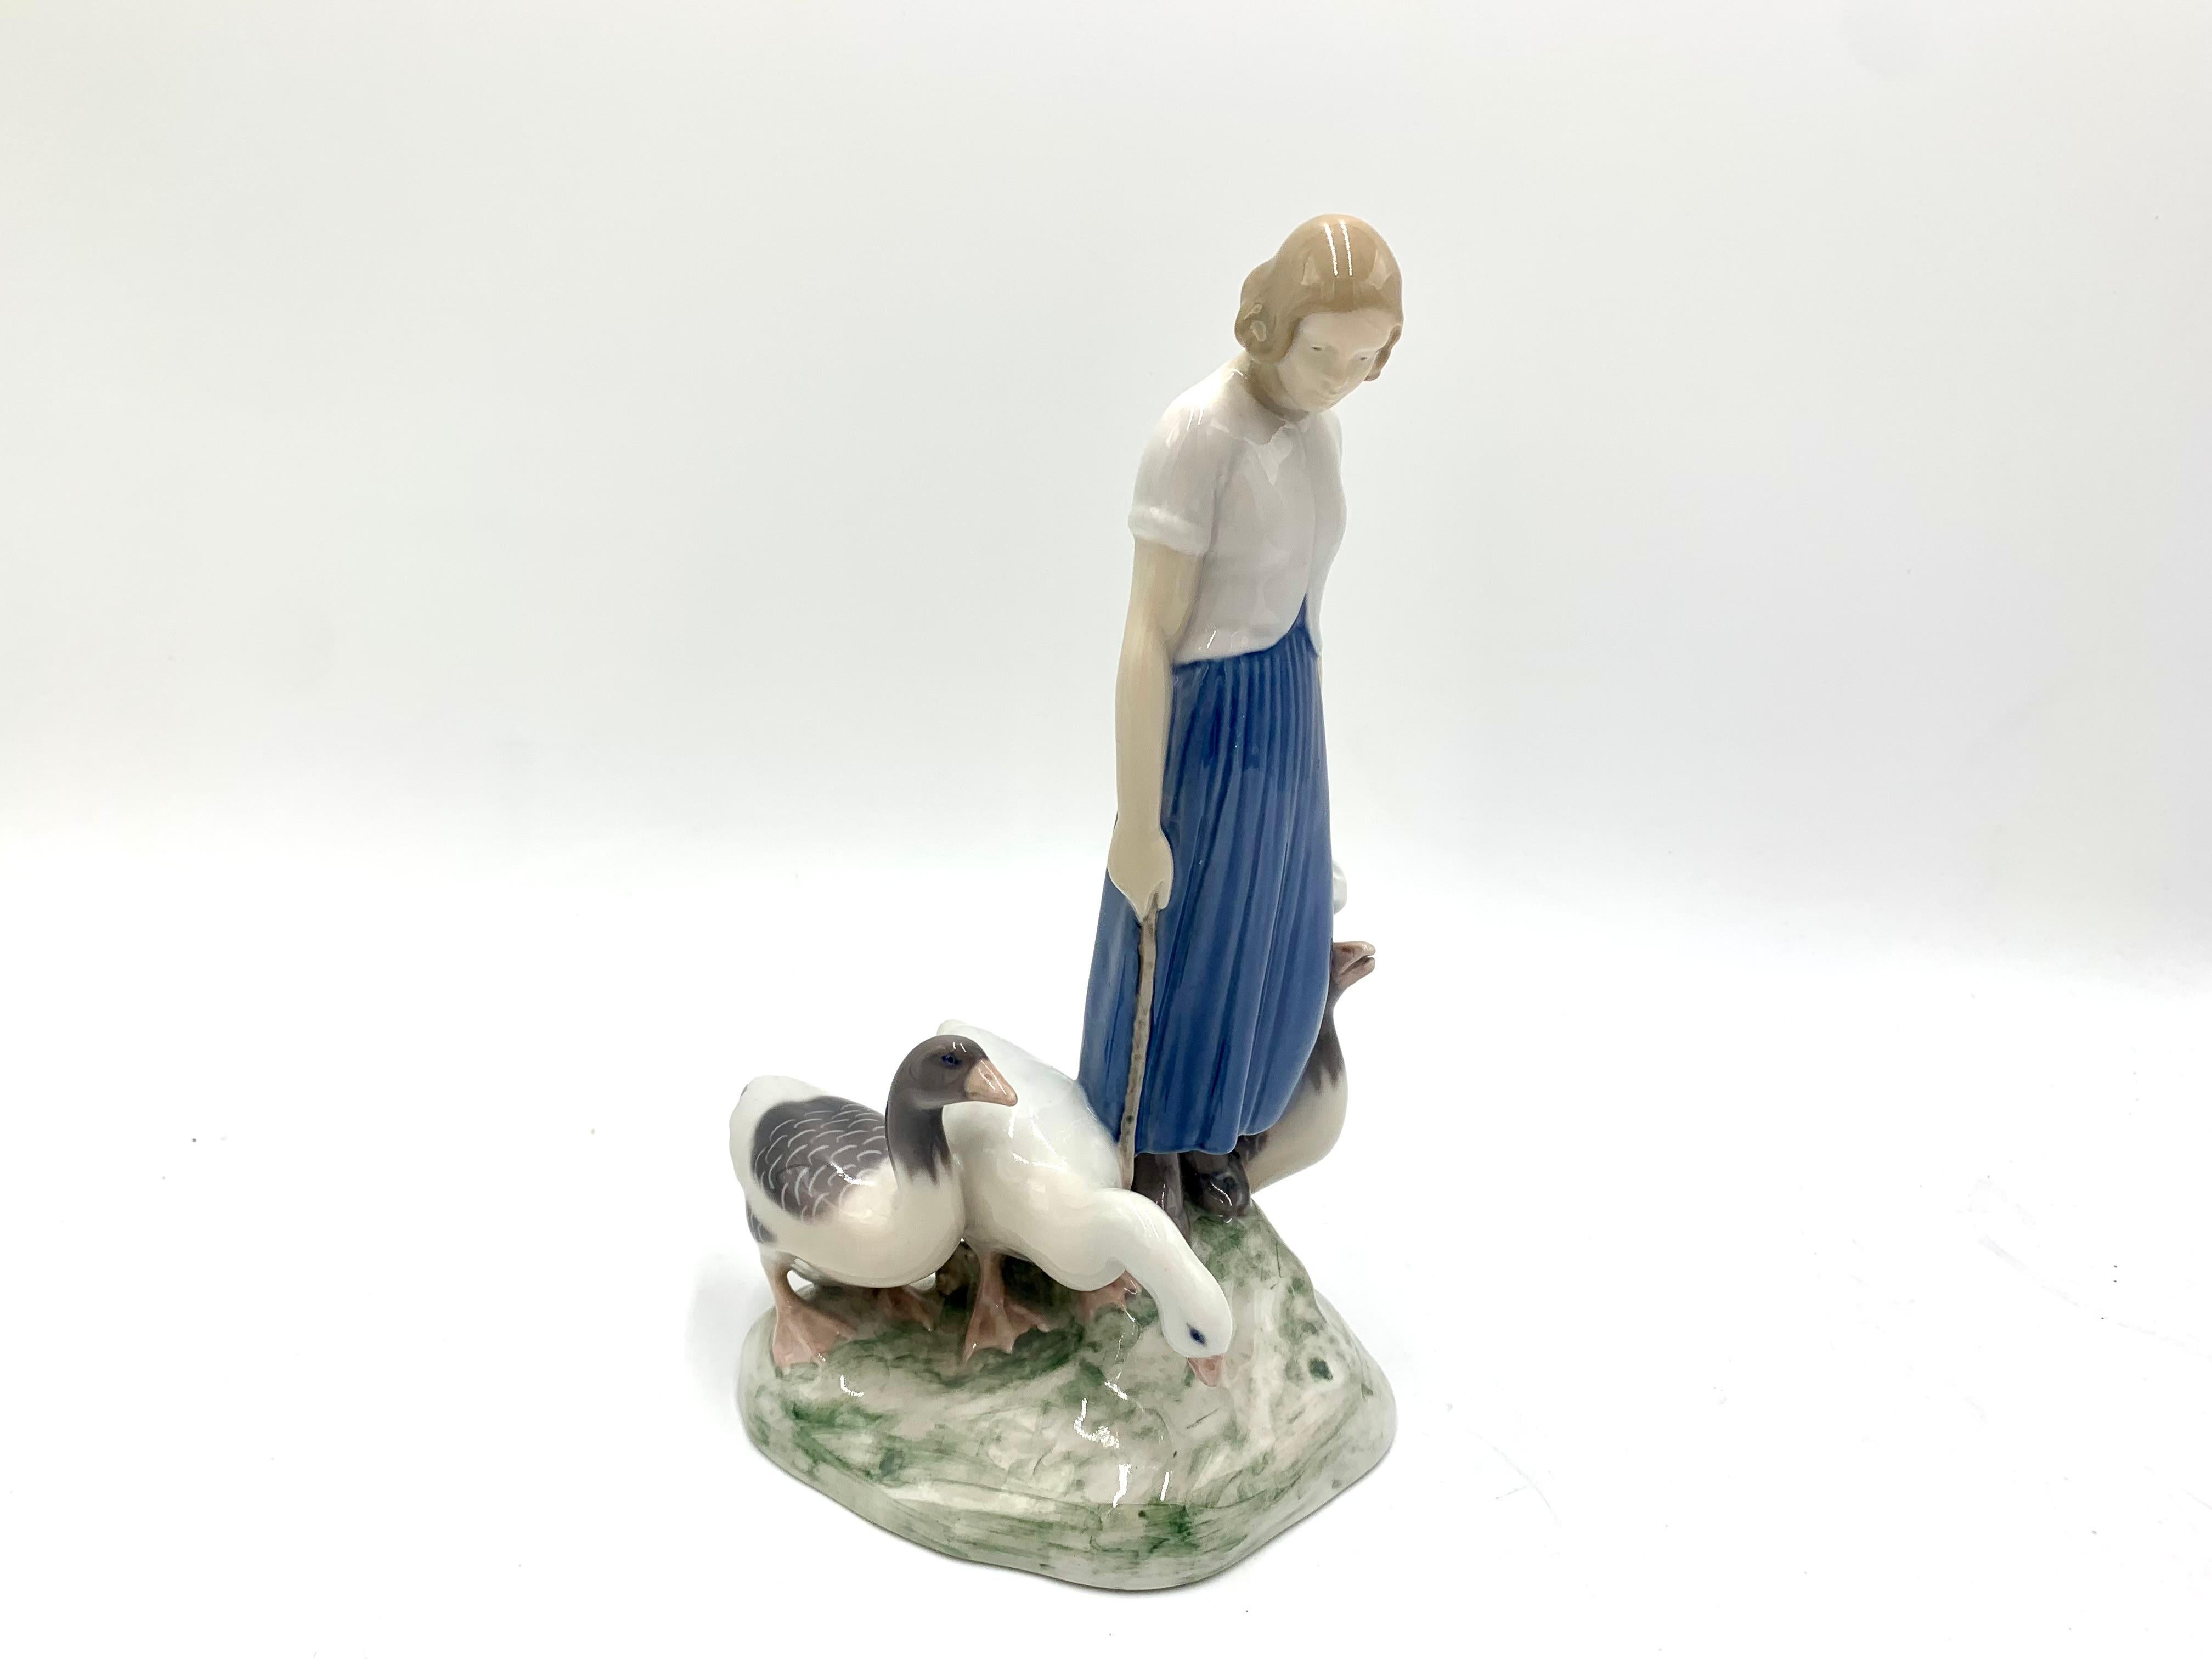 Porcelain figurine of a woman with geese

Made in Denmark by Bing & Grondahl

Manufactured in 1958-1962.

Model number # 2254

Very good condition, no damage

Measures: height 23.5 cm width 11.5 cm depth 15 cm.